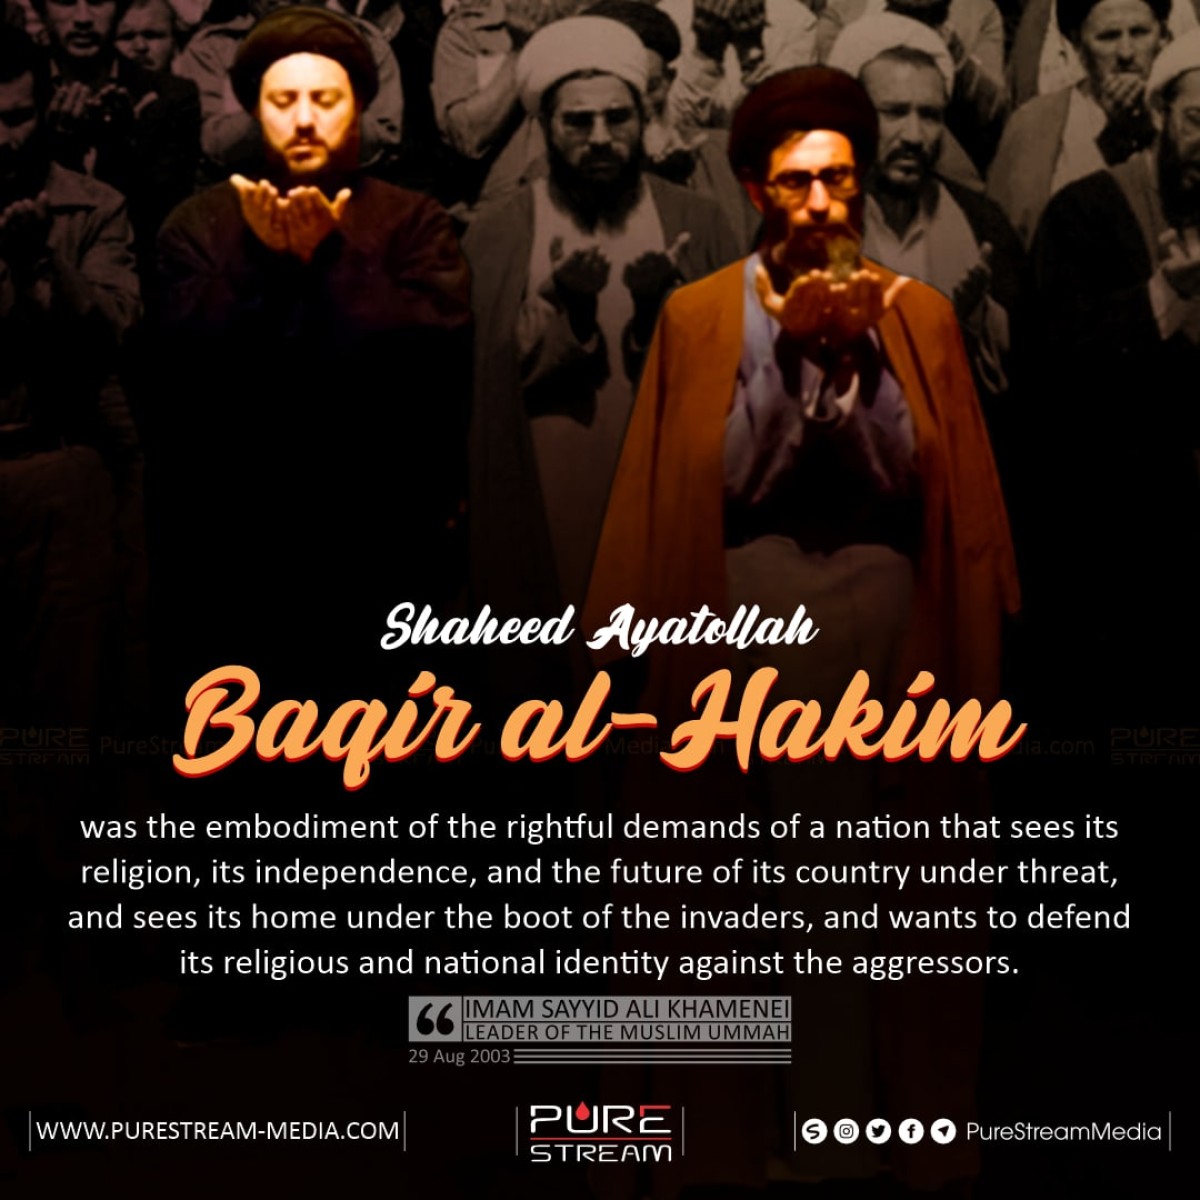 Shaheed Ayatollah Baqir al-Hakim was the embodiment of the rightful demands of a nation that sees its religion